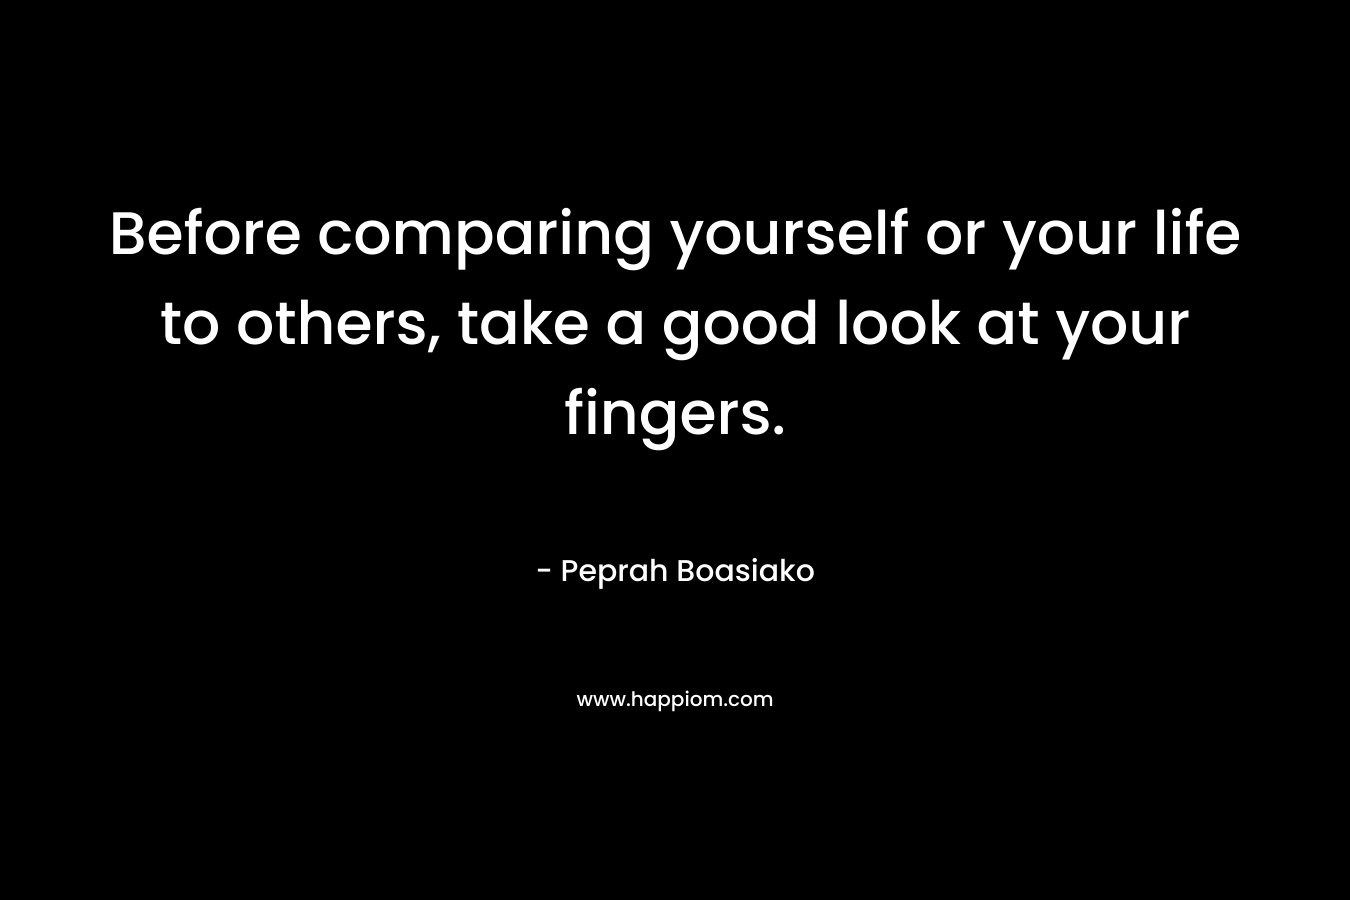 Before comparing yourself or your life to others, take a good look at your fingers.